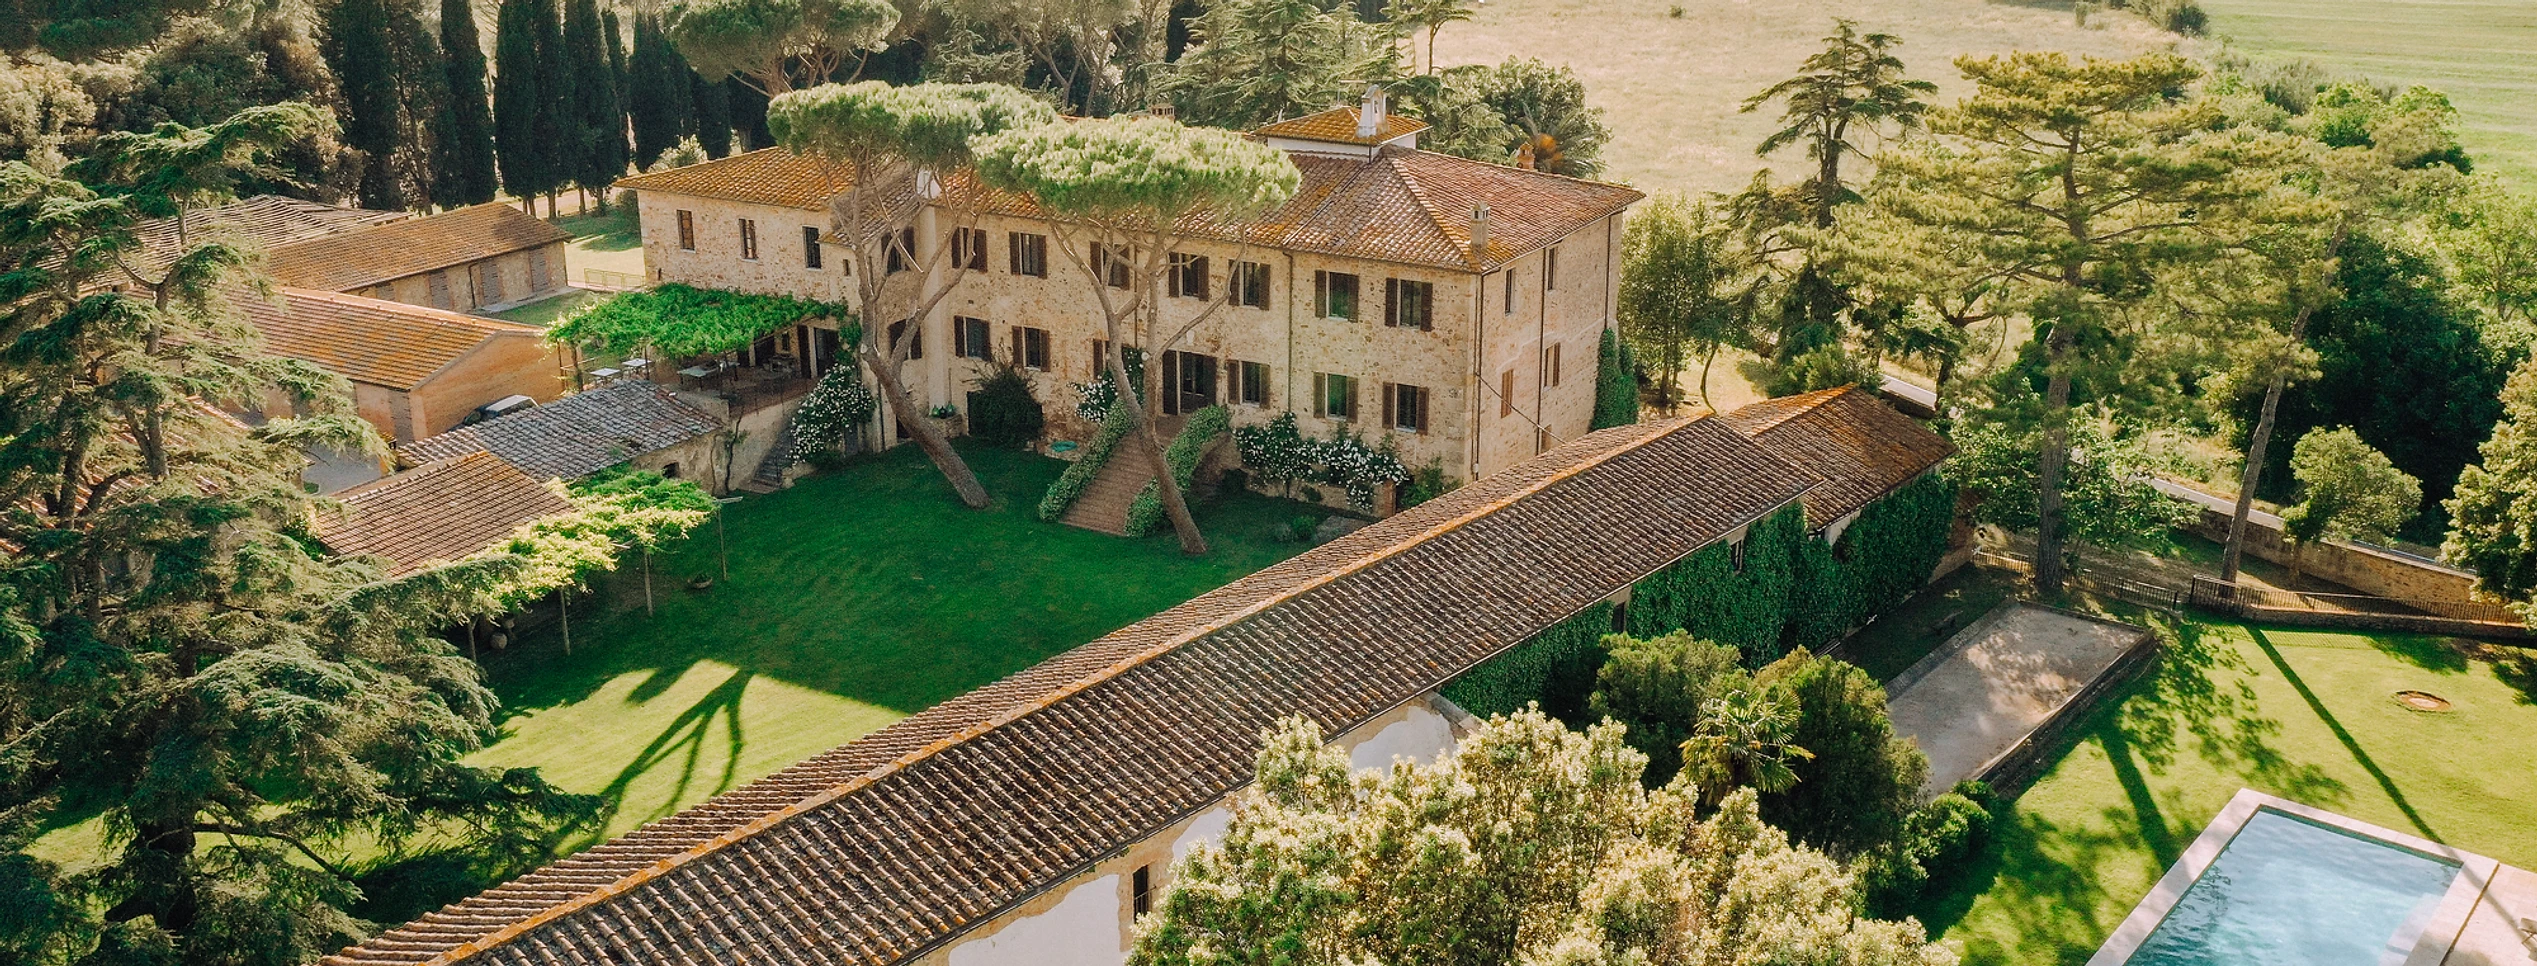 La Pescaia is an estate in Tuscany, famous place for luxury weddings in Italy